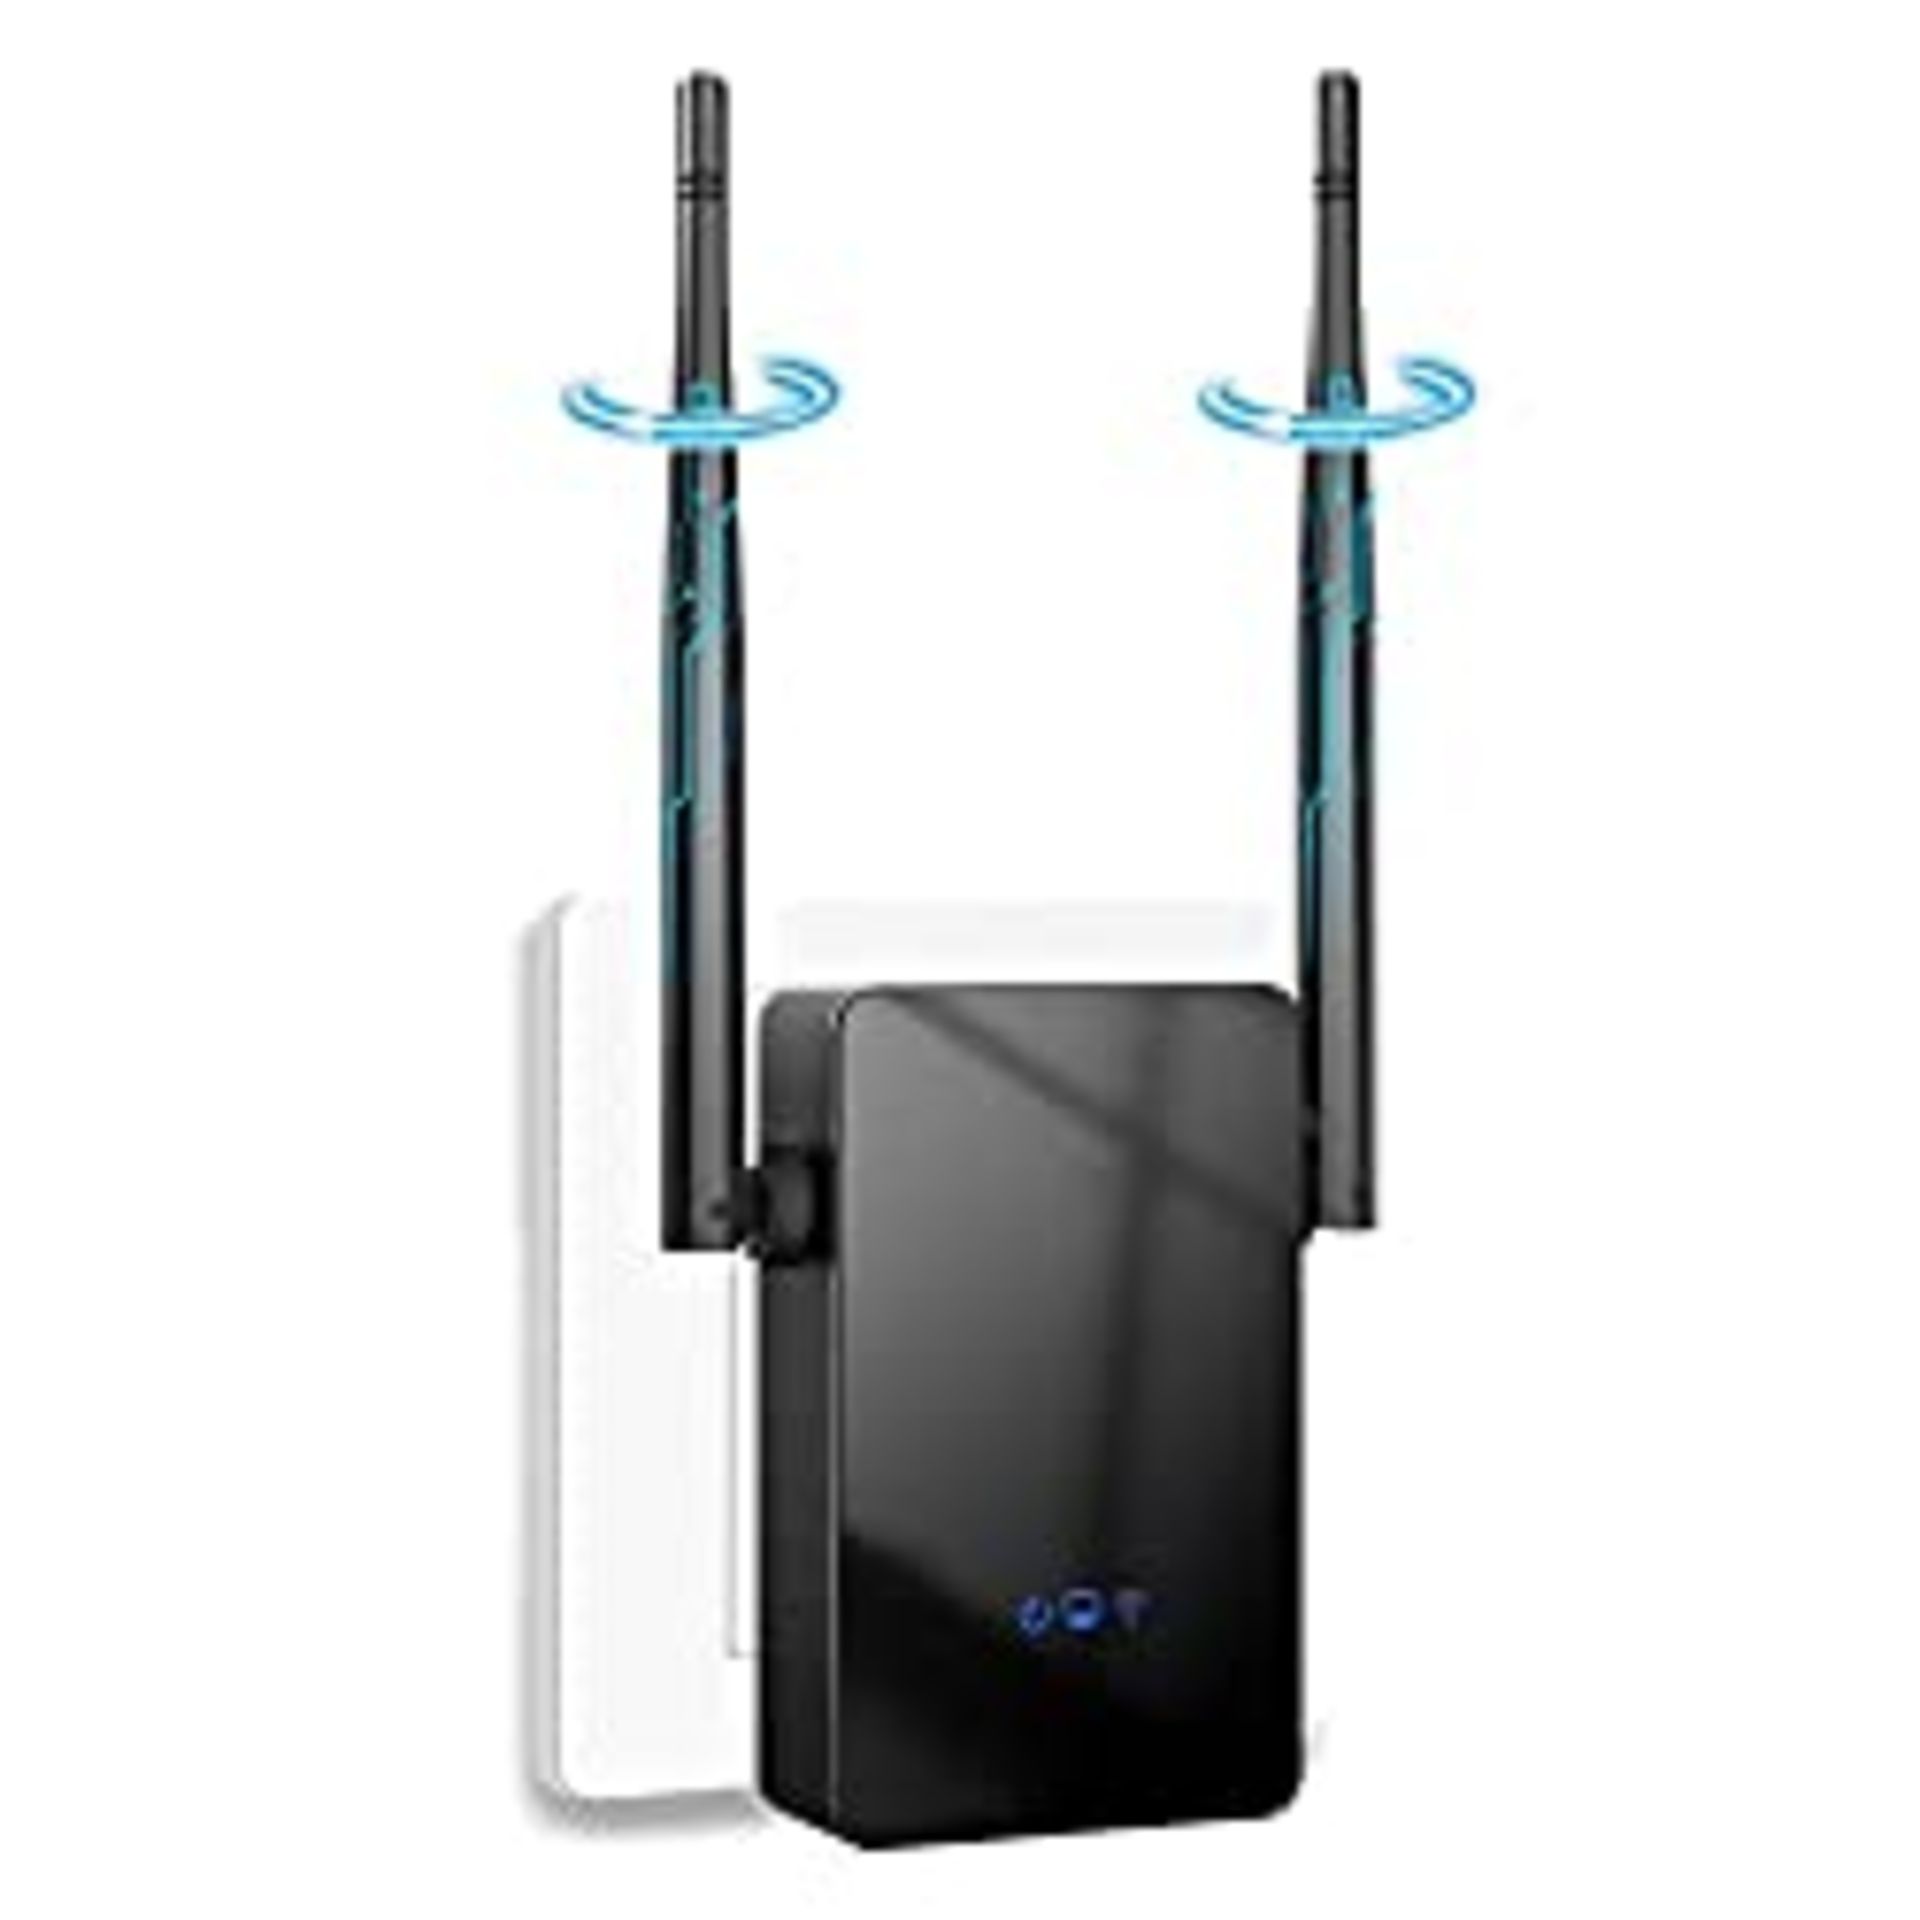 RRP £28.99 Fonowt WiFi Extender Booster 300Mbps WiFi Booster